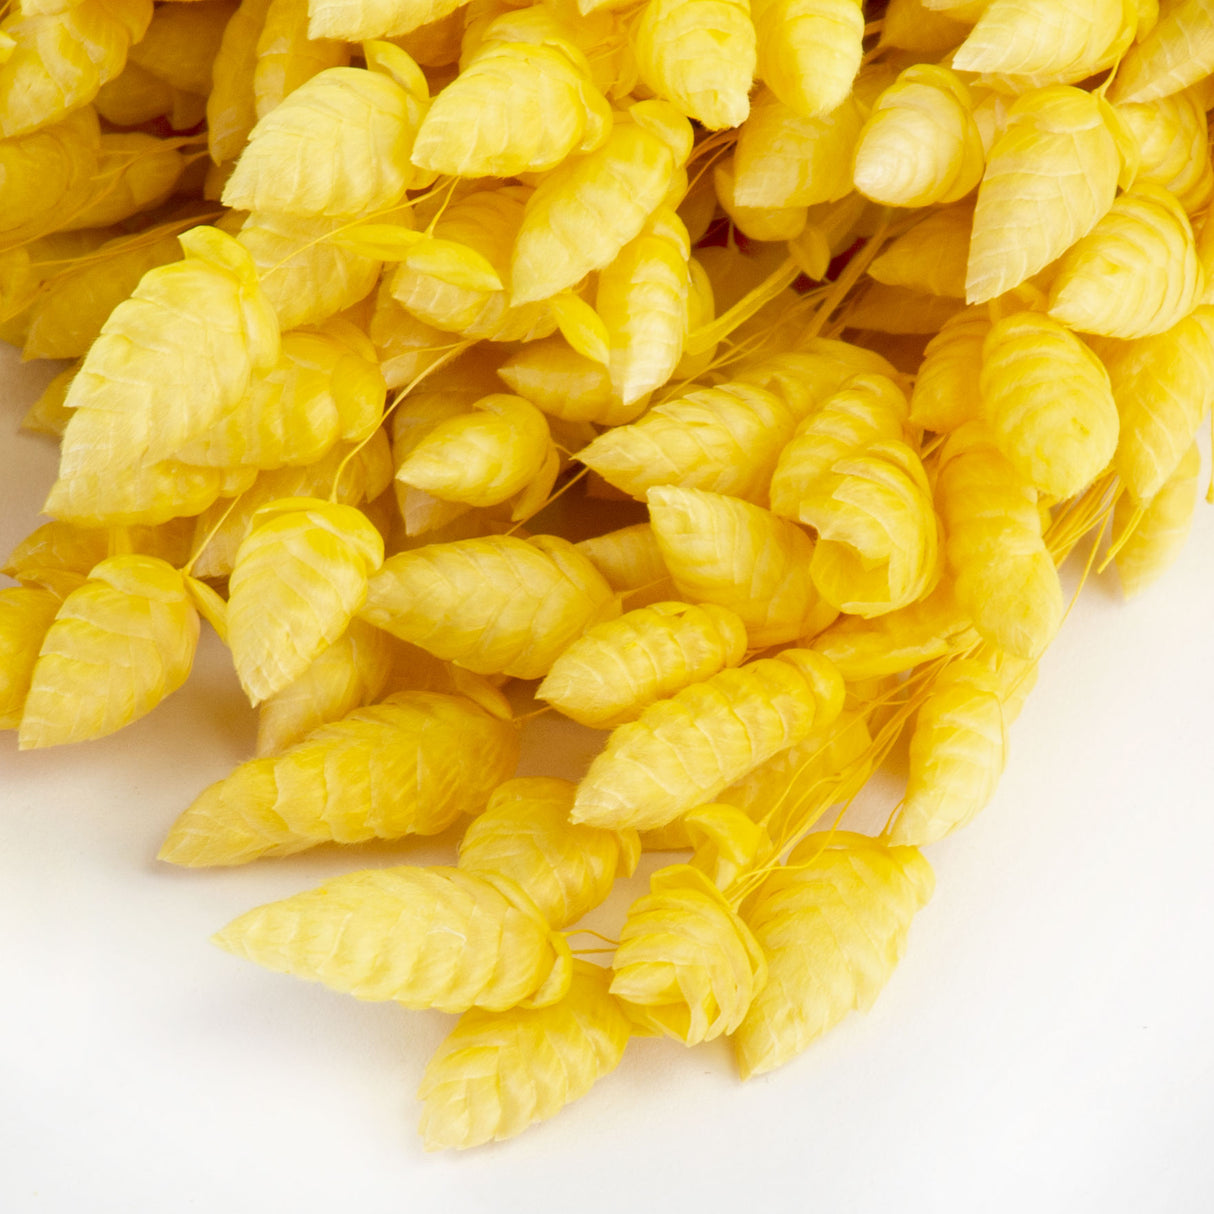 This image shows a bunch of yellow briza maxima against a white background